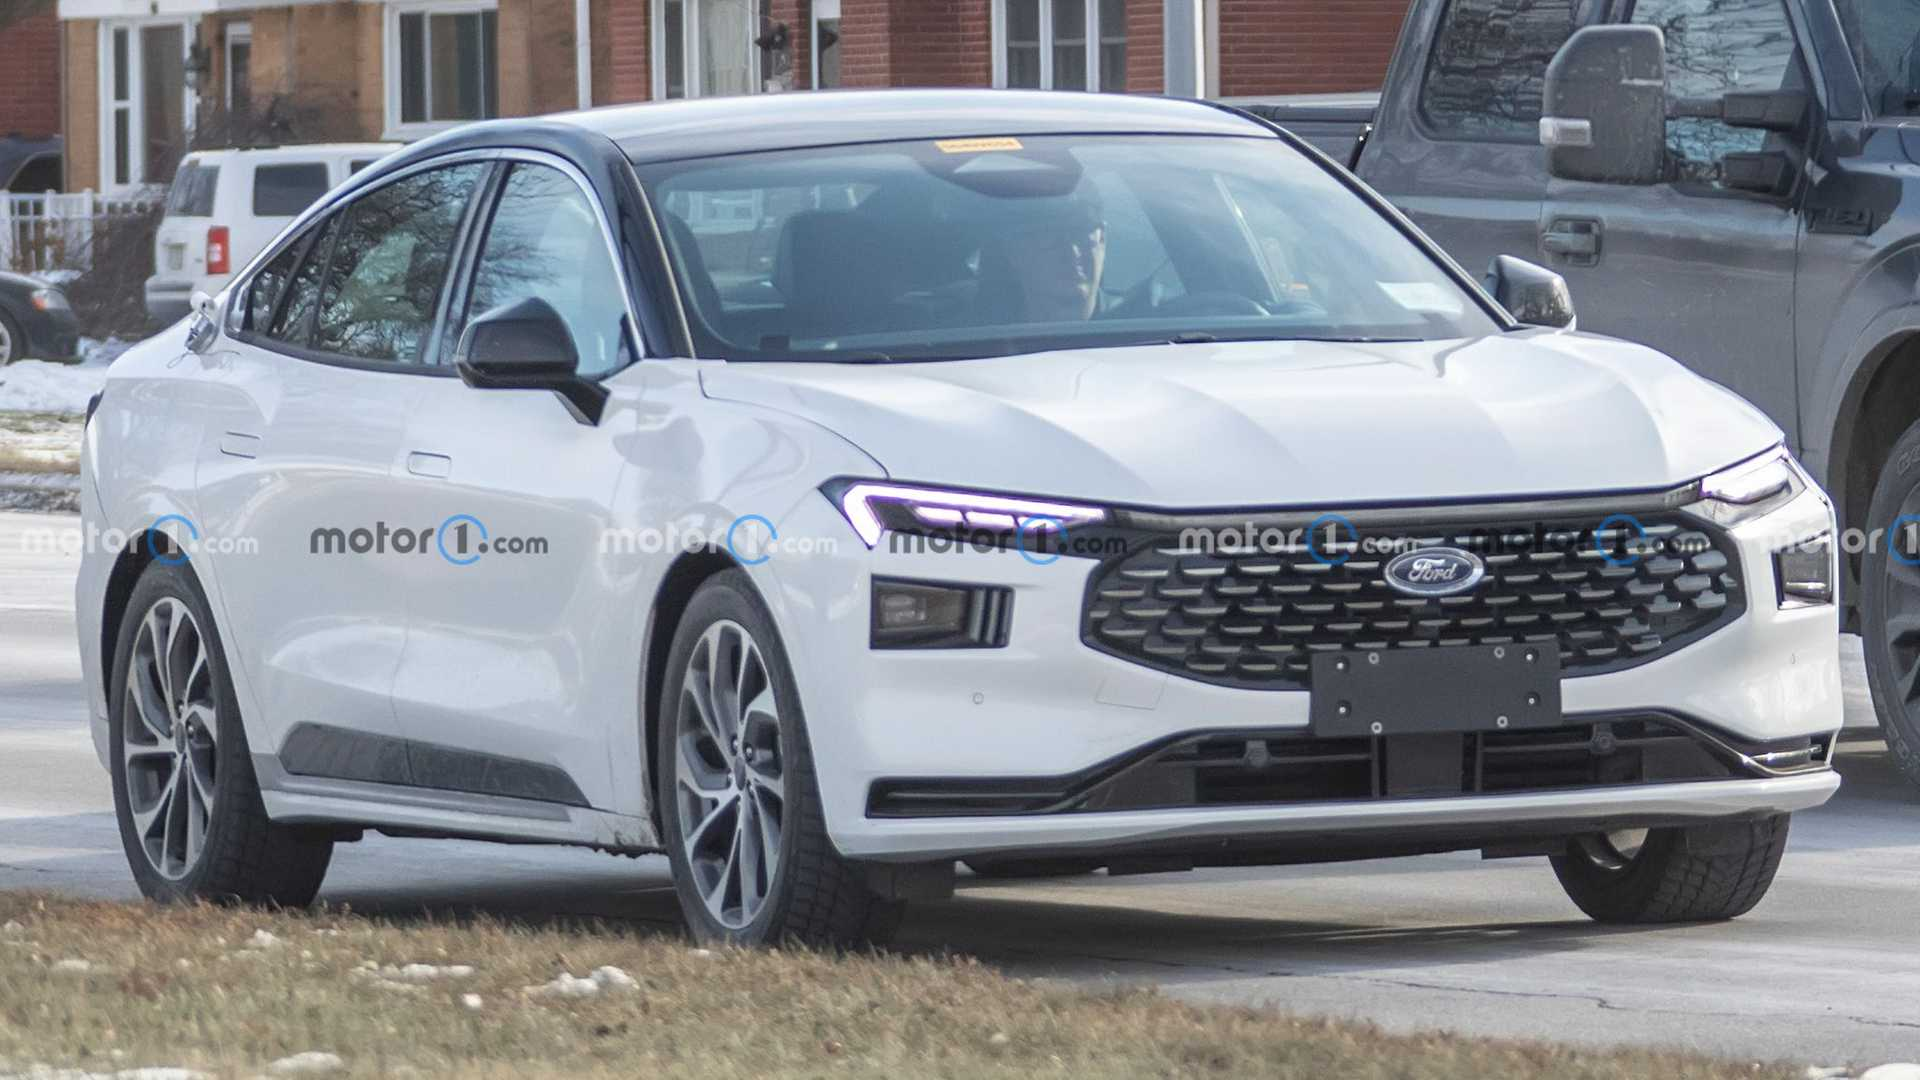 S650 Mustang First Look: S650 Mustang Prototype Spied With Production Body! 📸 1642203235607